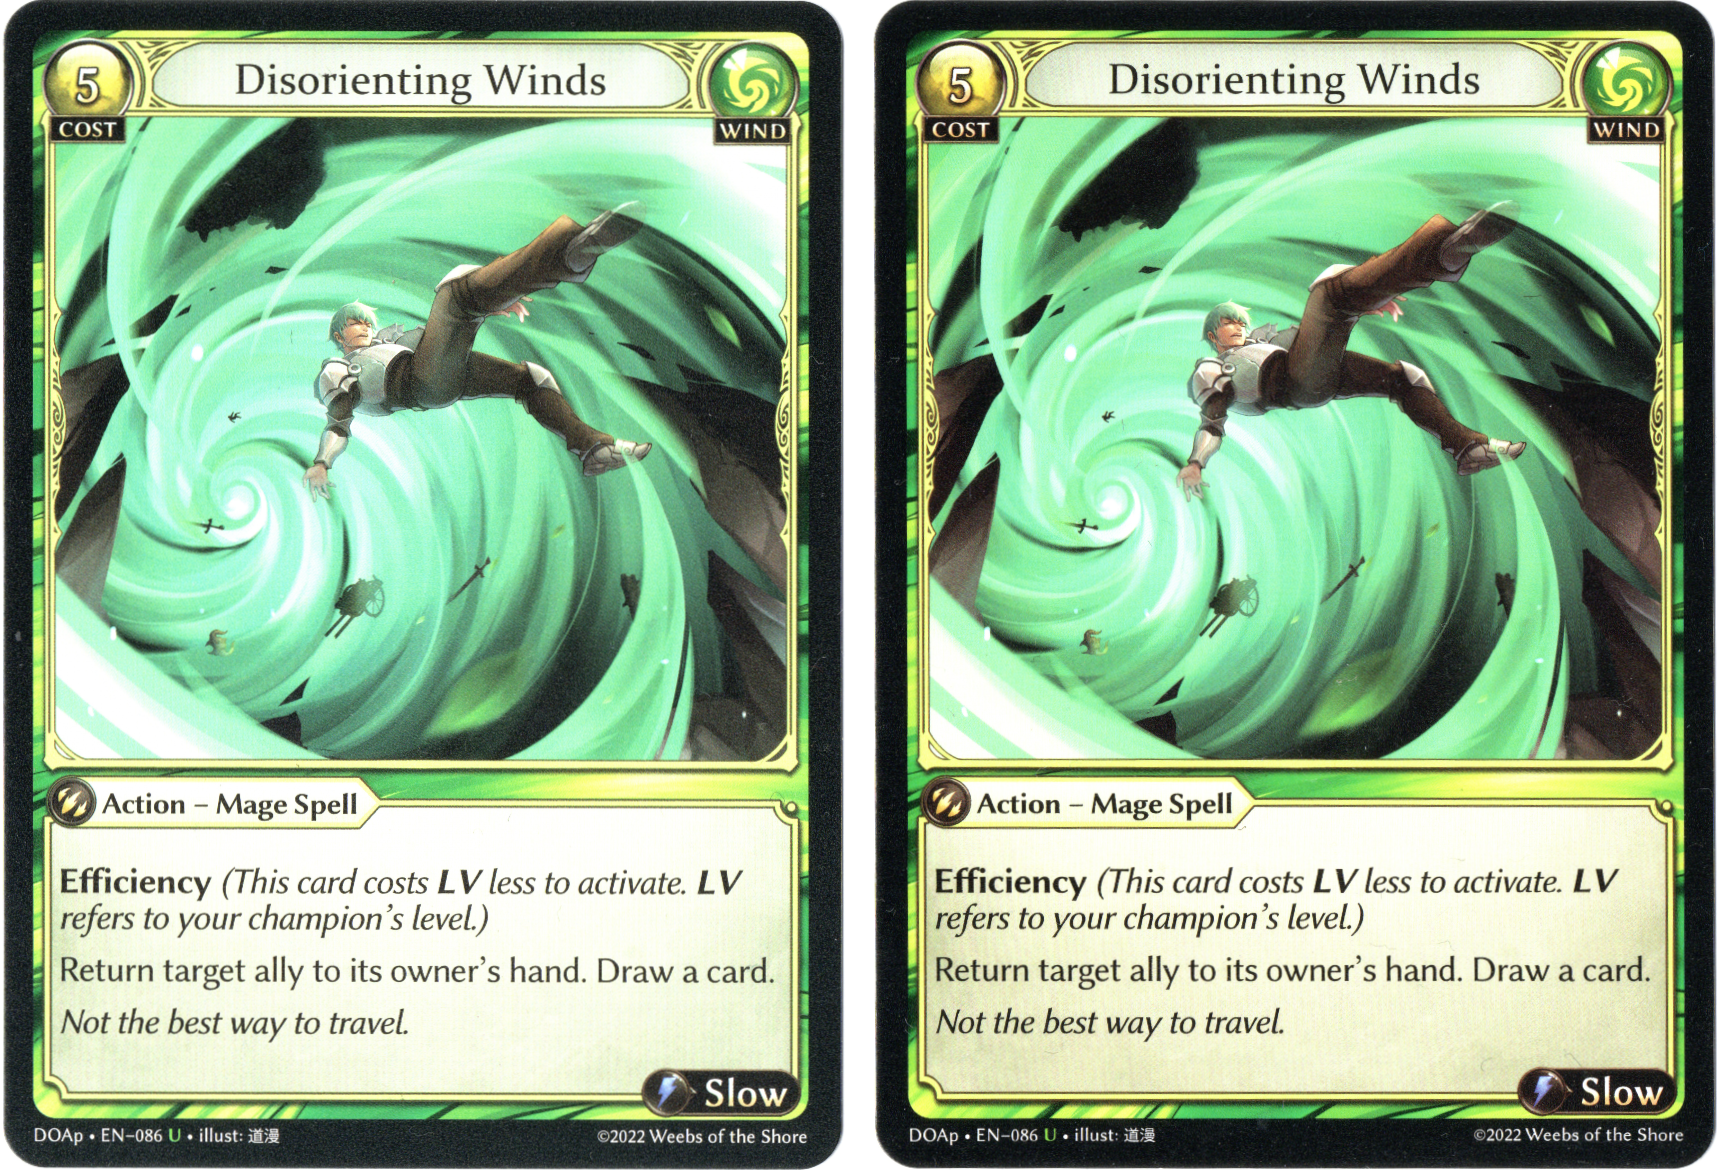 DOAp Disorienting Winds starter deck print (left) vs booster pack print (right).